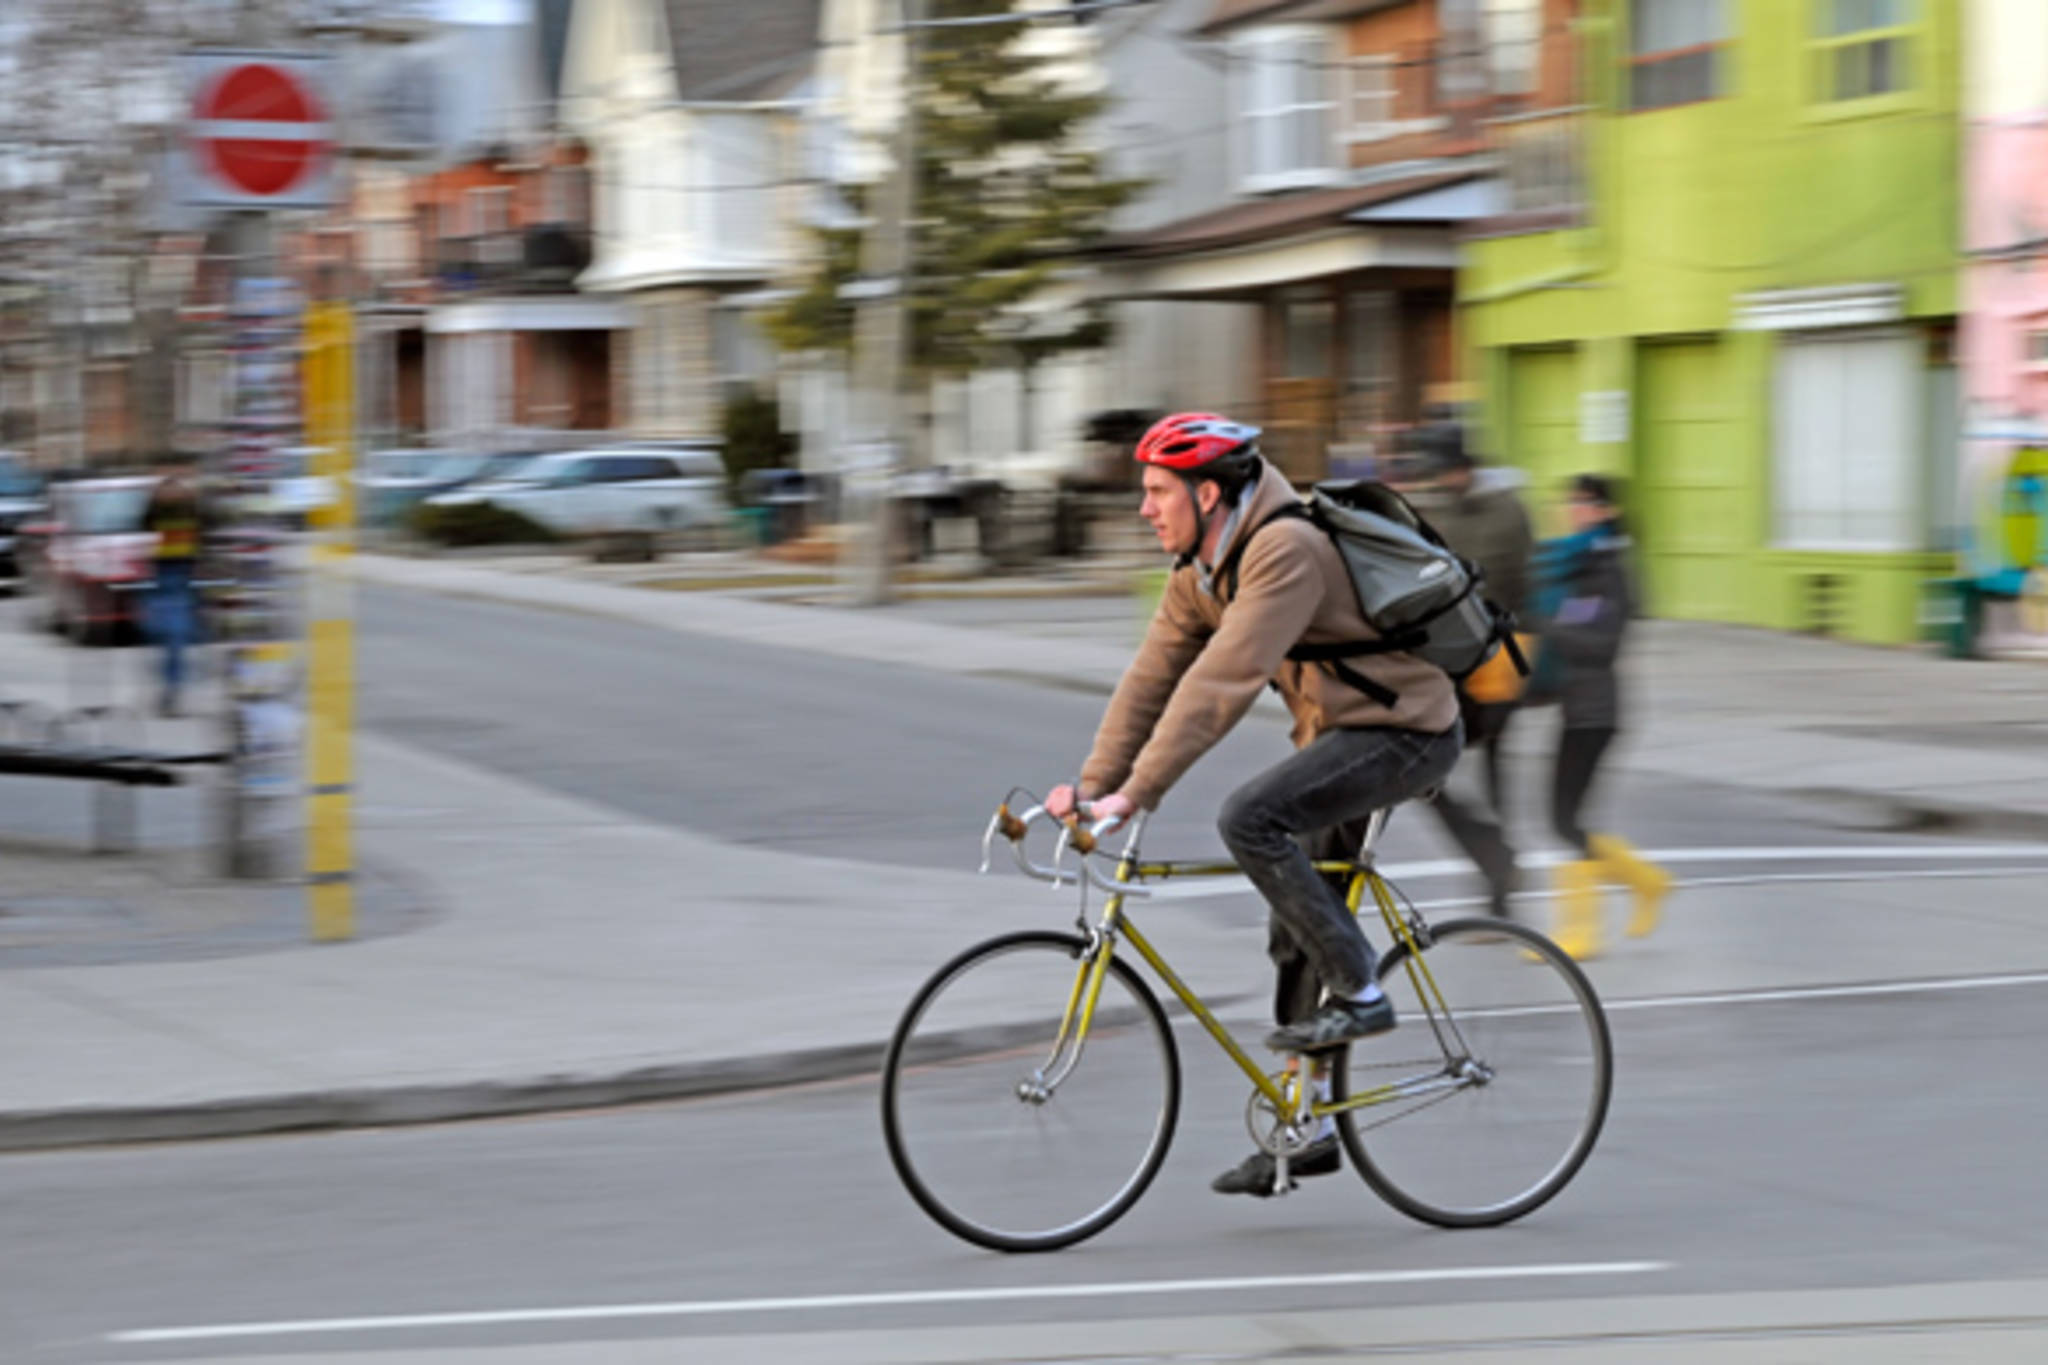 5 reasons why licensing cyclists in Toronto is a bad idea